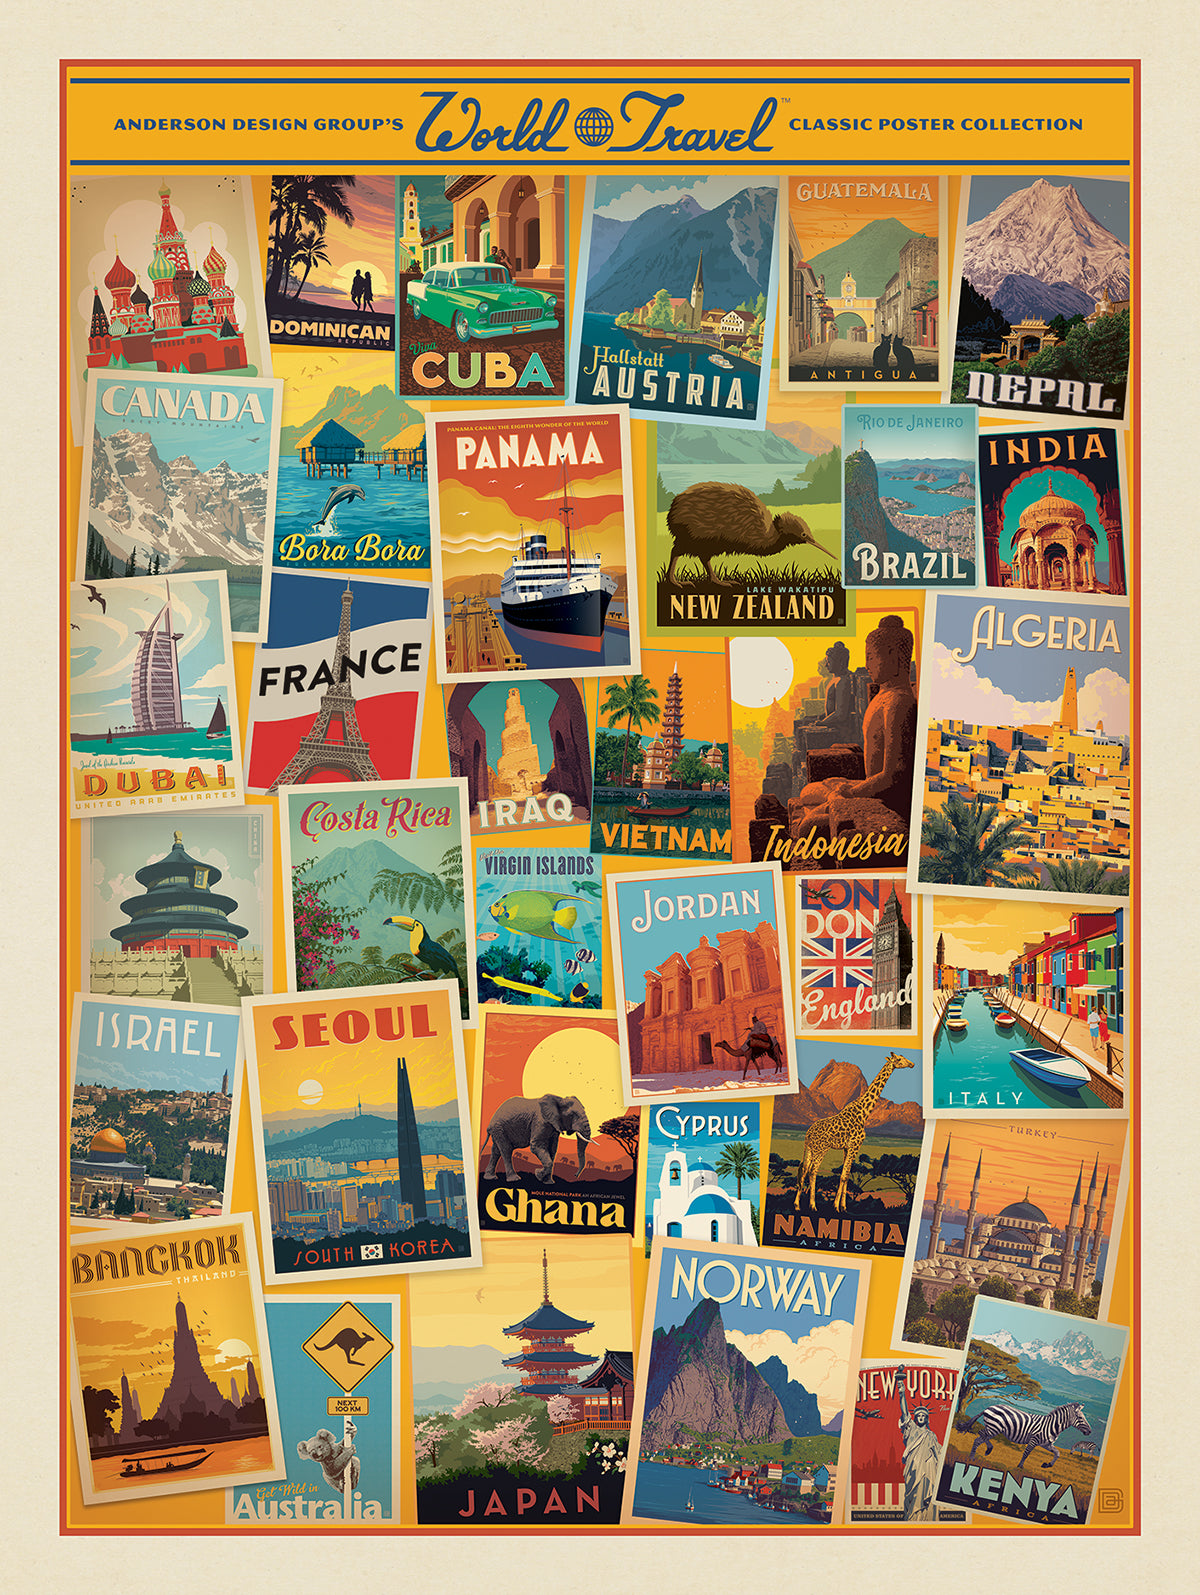 Remember Your Global Travel With Our Prints